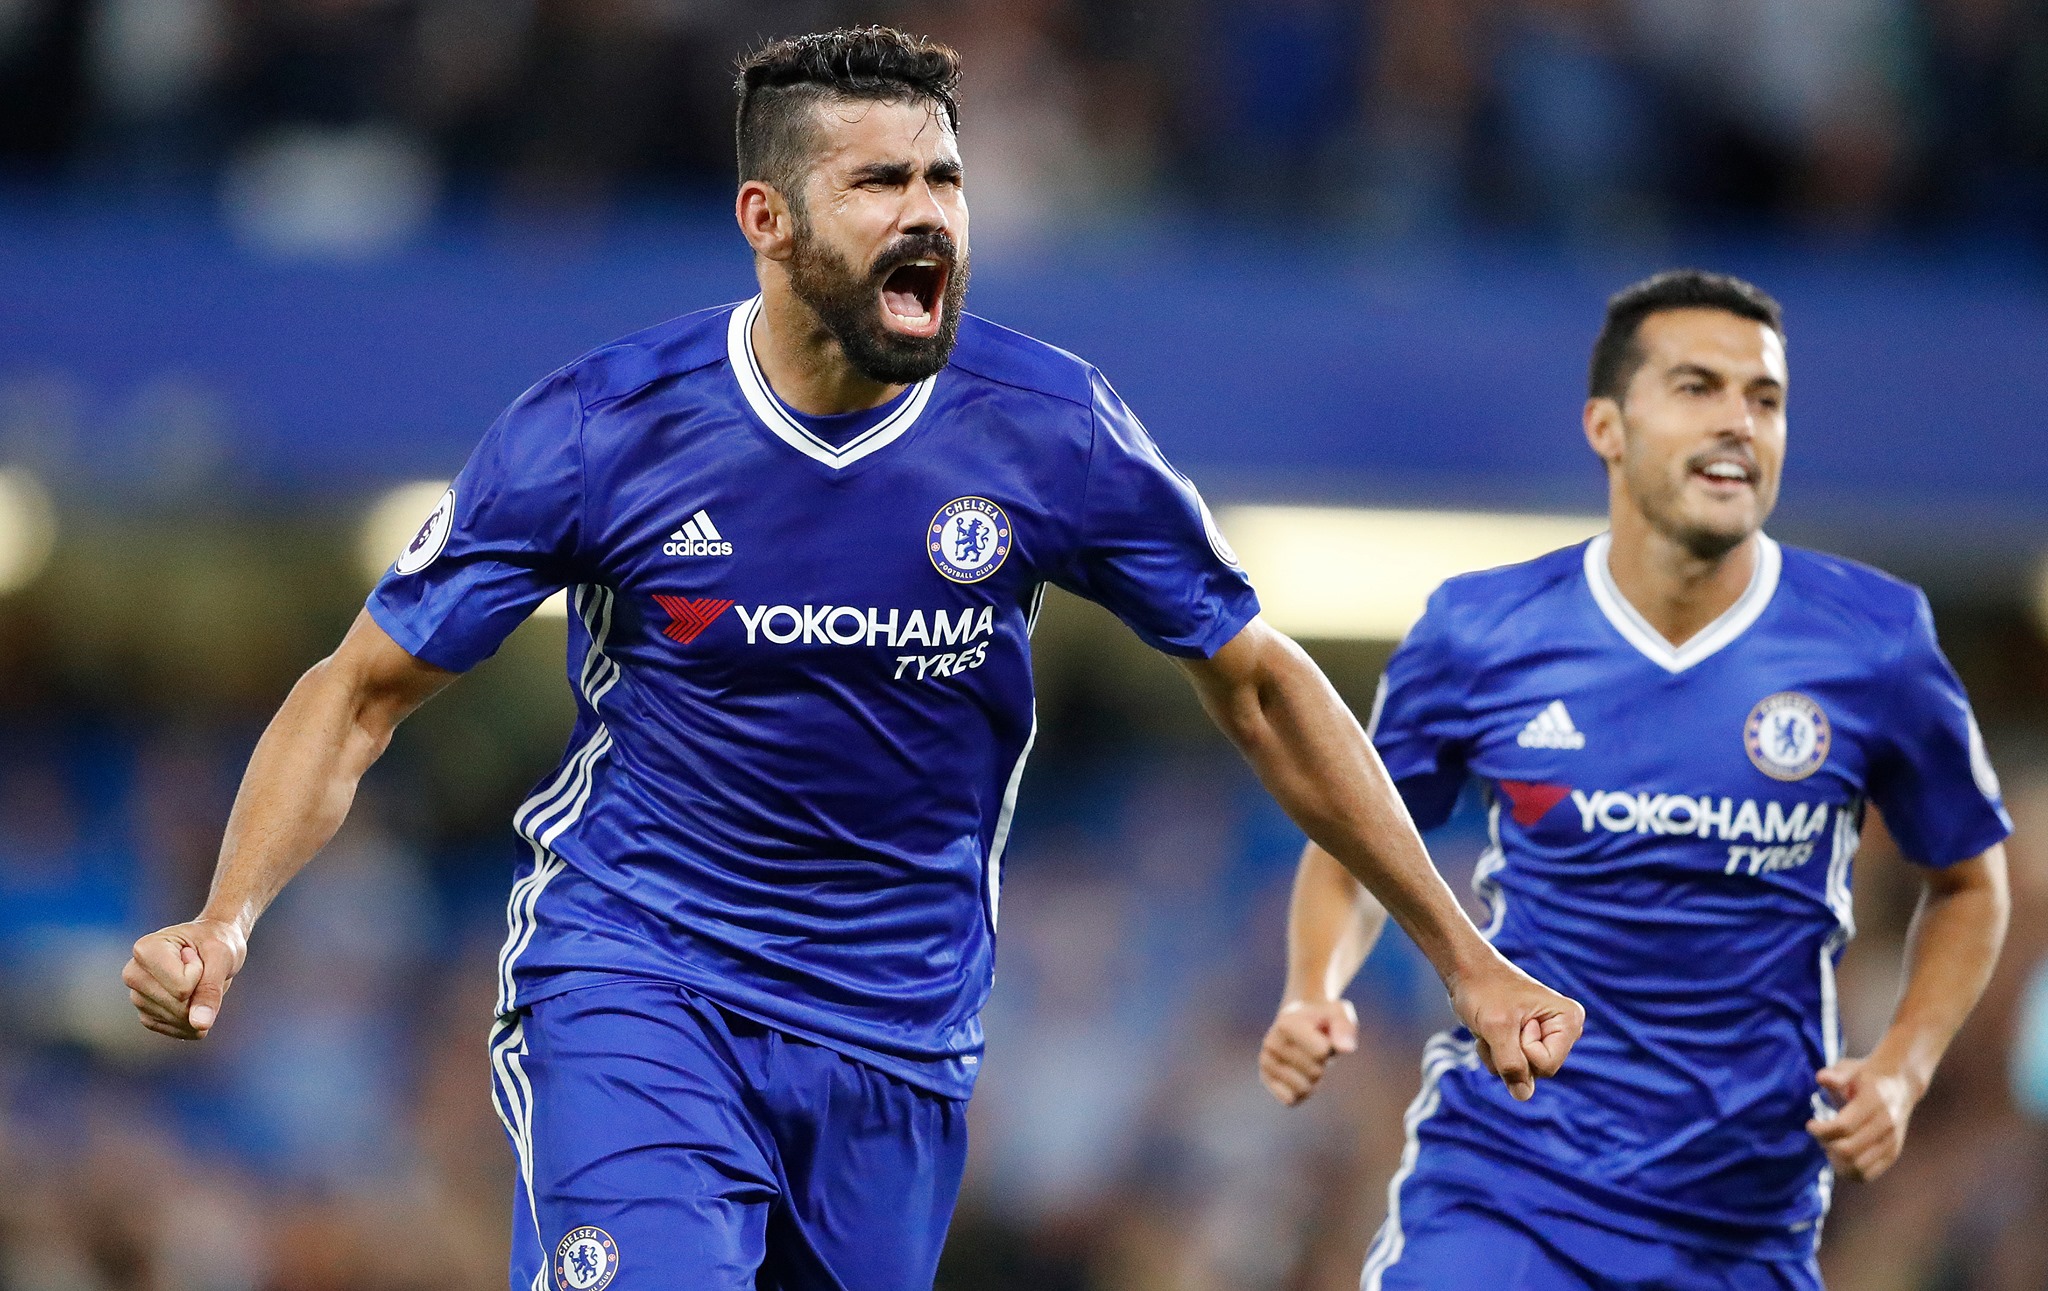 Costa's move to Chelsea has caused him the issues. Image: PA Images